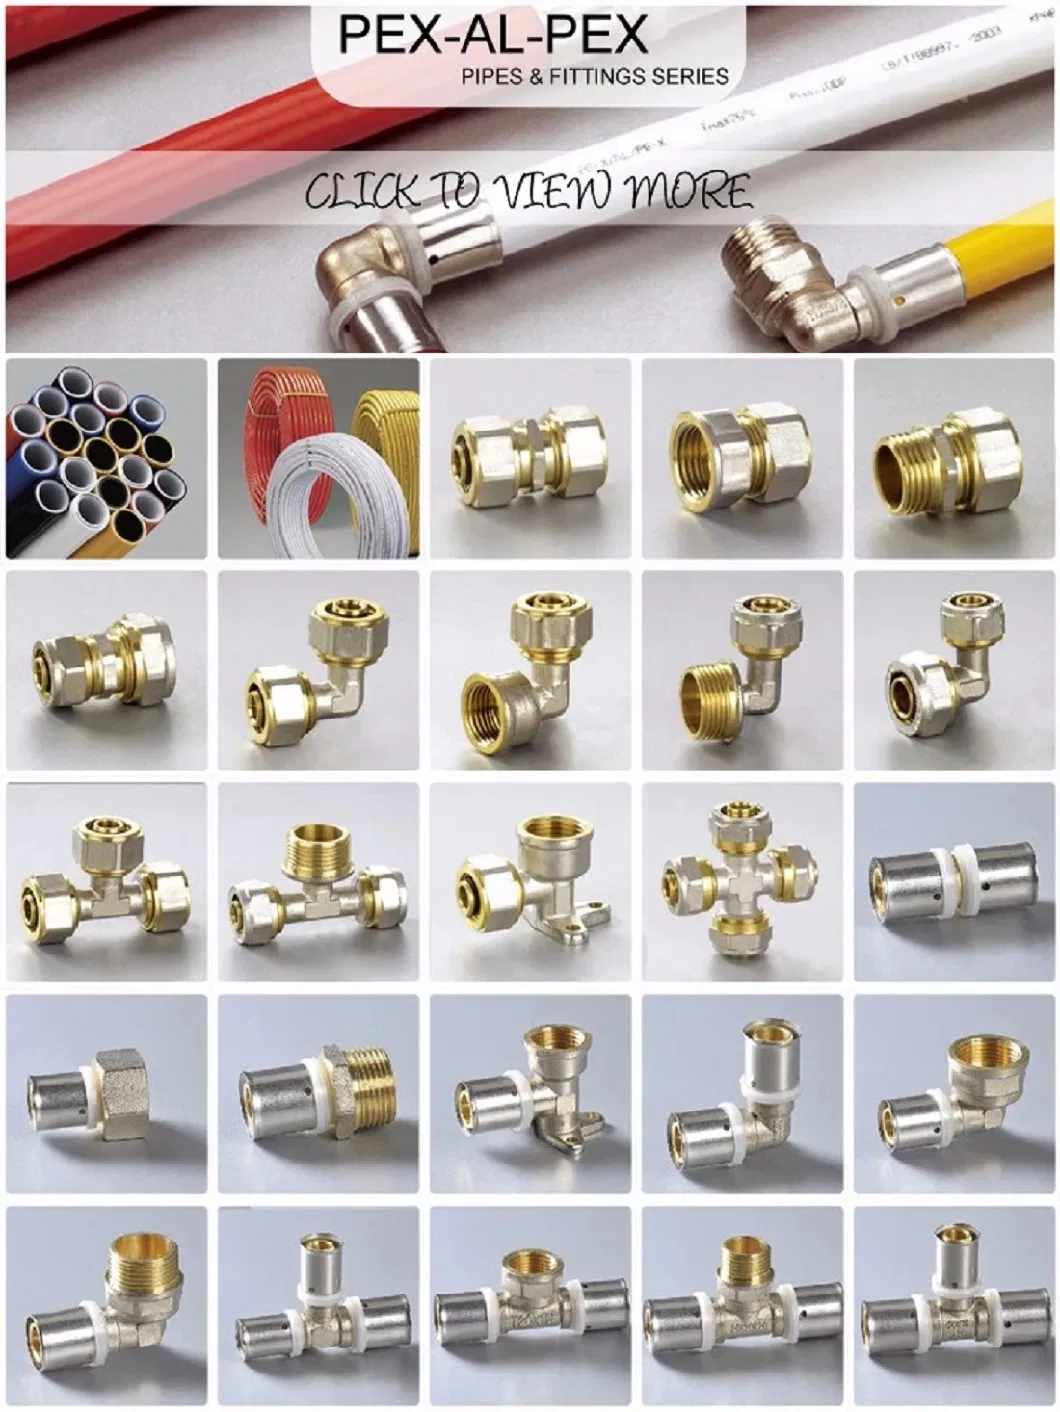 Brass/Pipe/Hose Fitting Equal Female Elbow Compression Brass Fittings for Pex-Al-Pex Multilayer/Composite Pipes